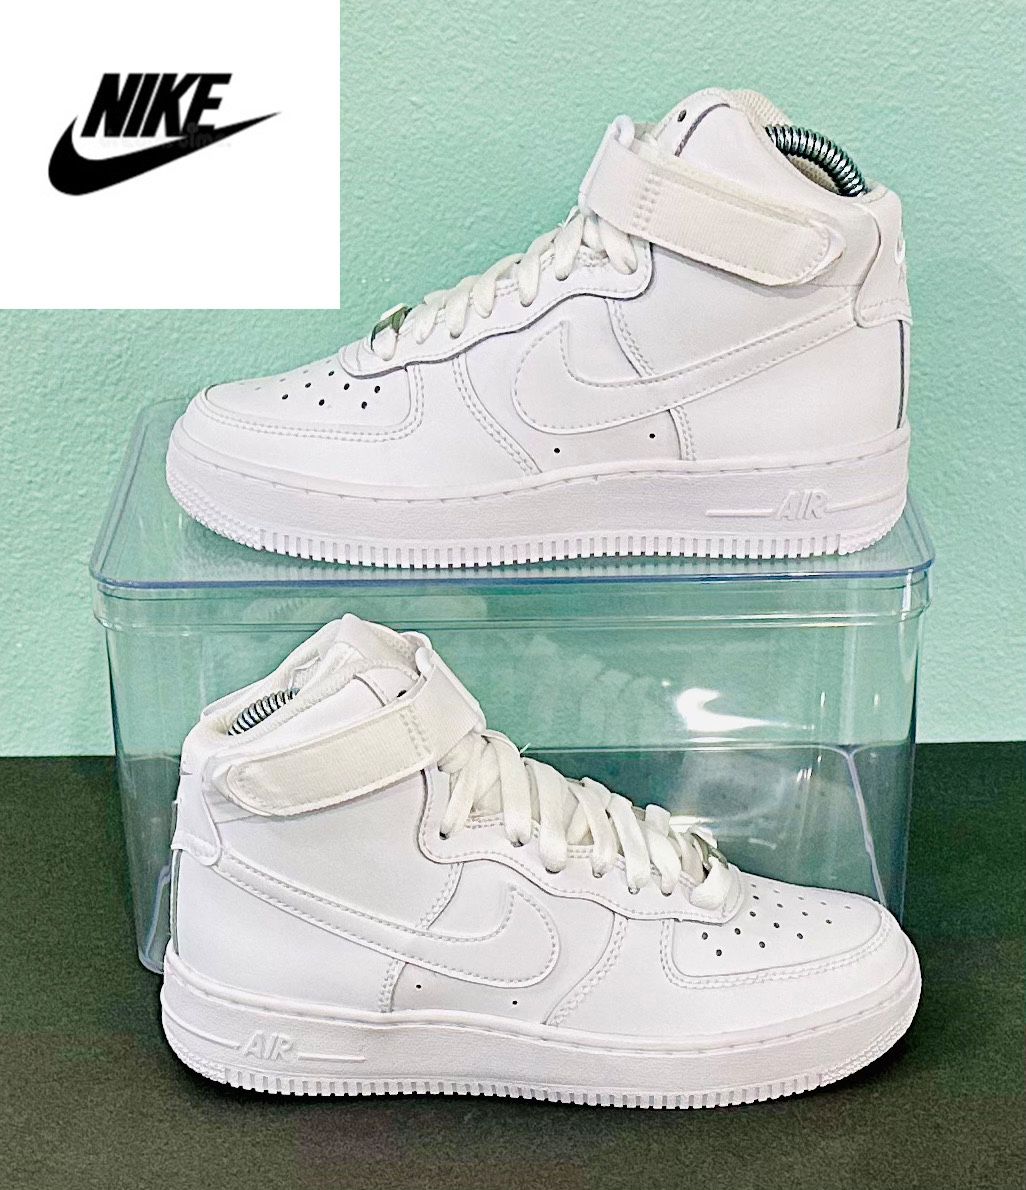 Nike Air Force 1 High ‘Triple White High-Top [DH2943-111] NEW!  SIZE: 4Y (YOUTH) / CM: 23